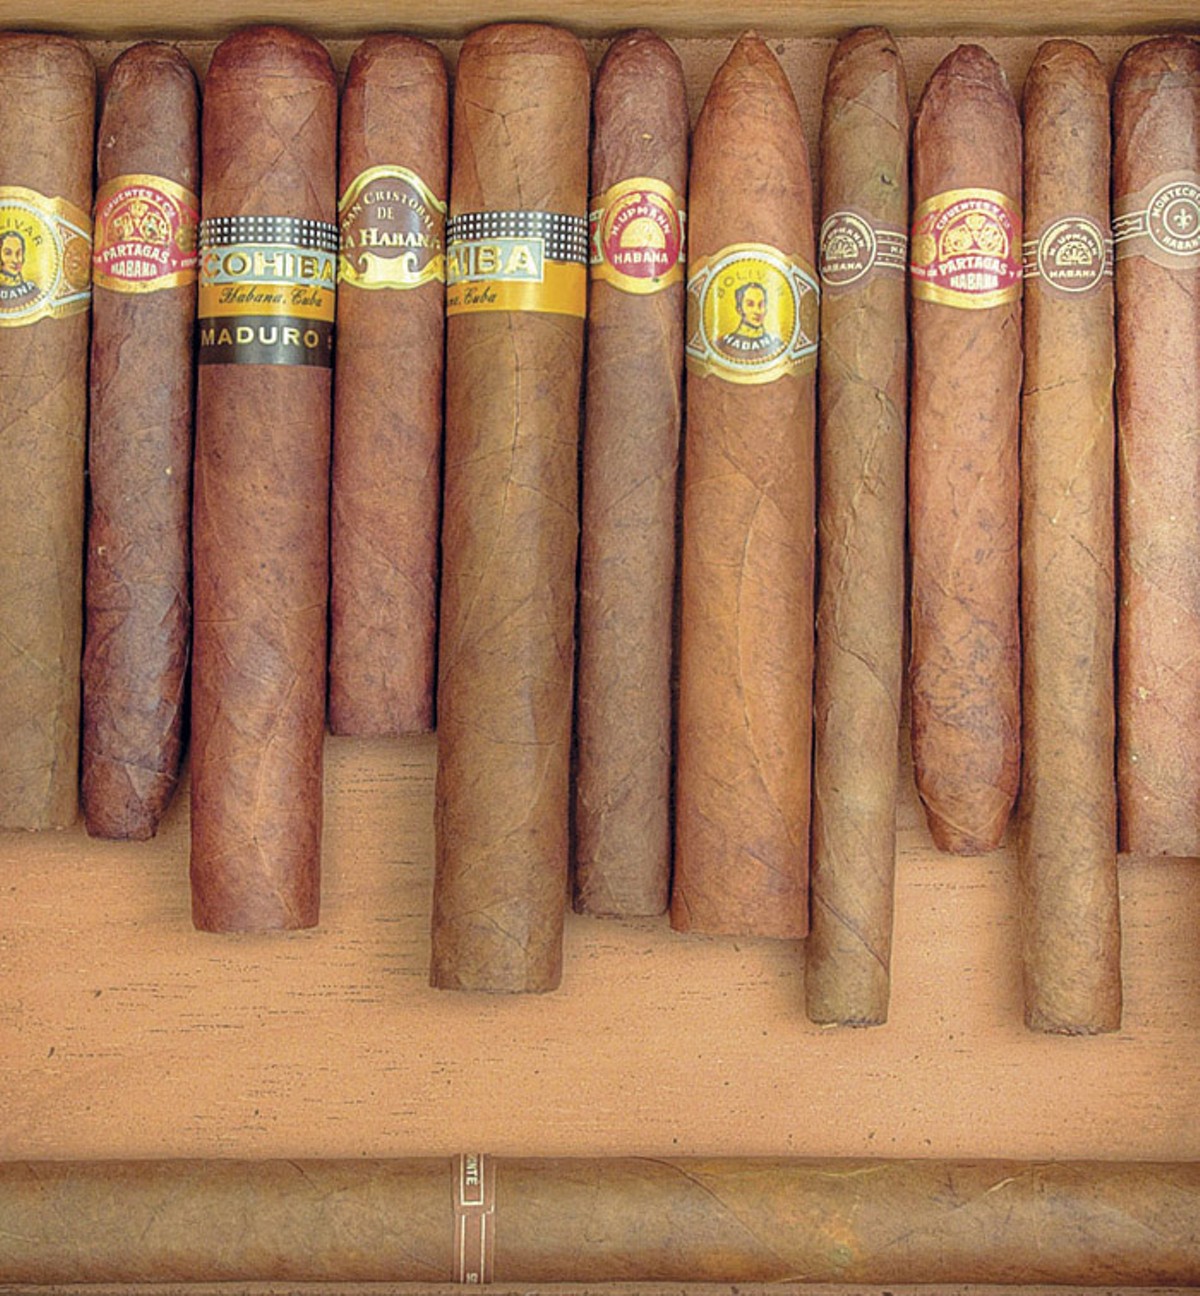 The Hill Cigar Company has a selection of boutique cigars.